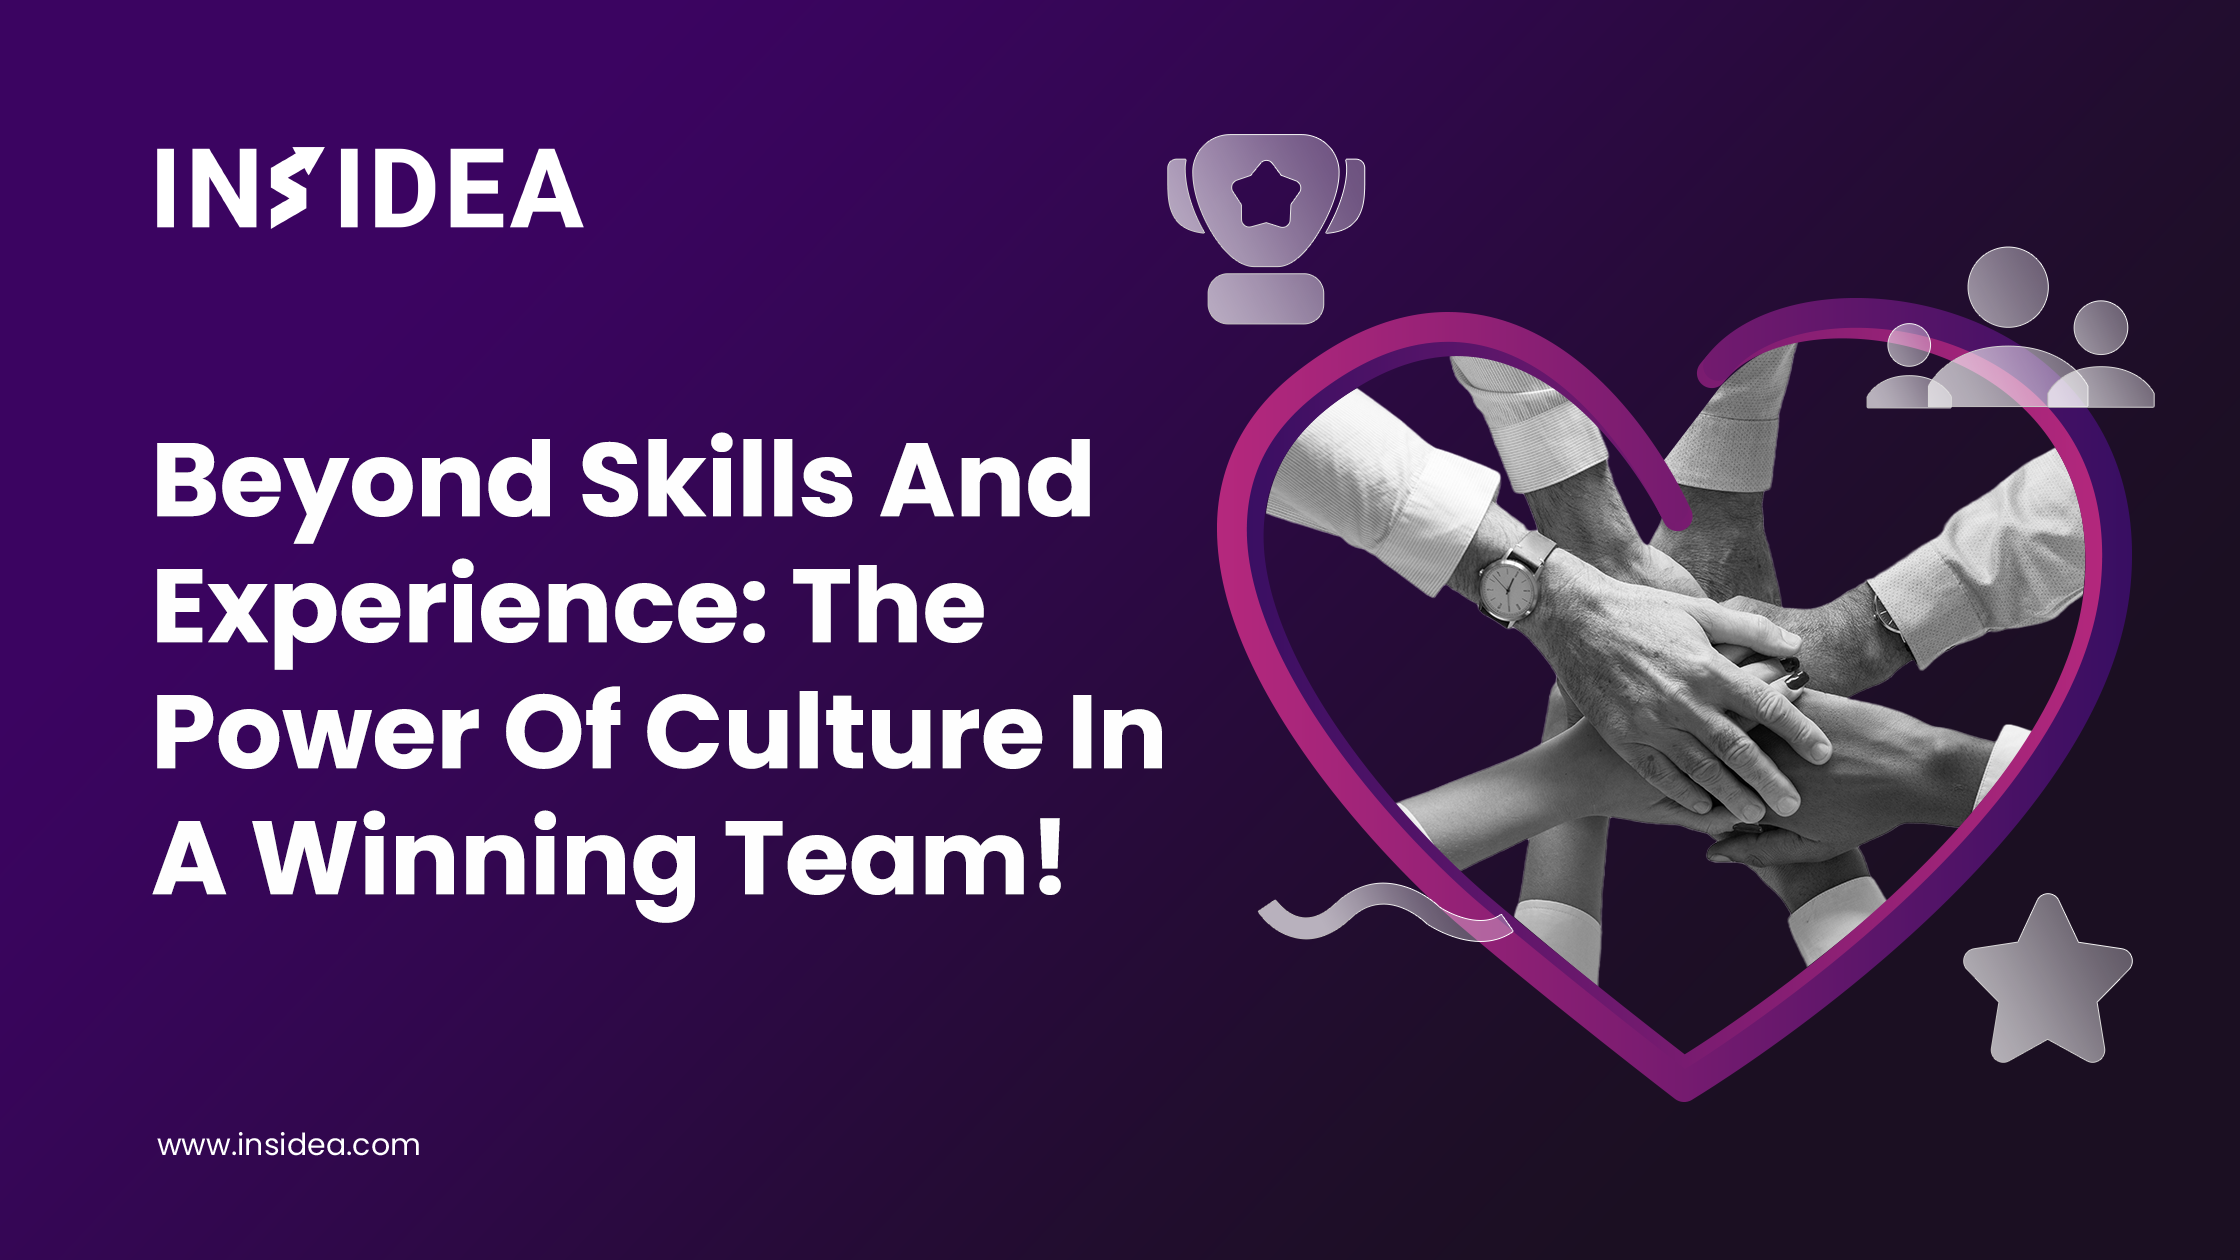 Beyond Skills And Experience: The Power Of Culture In A Winning Team!